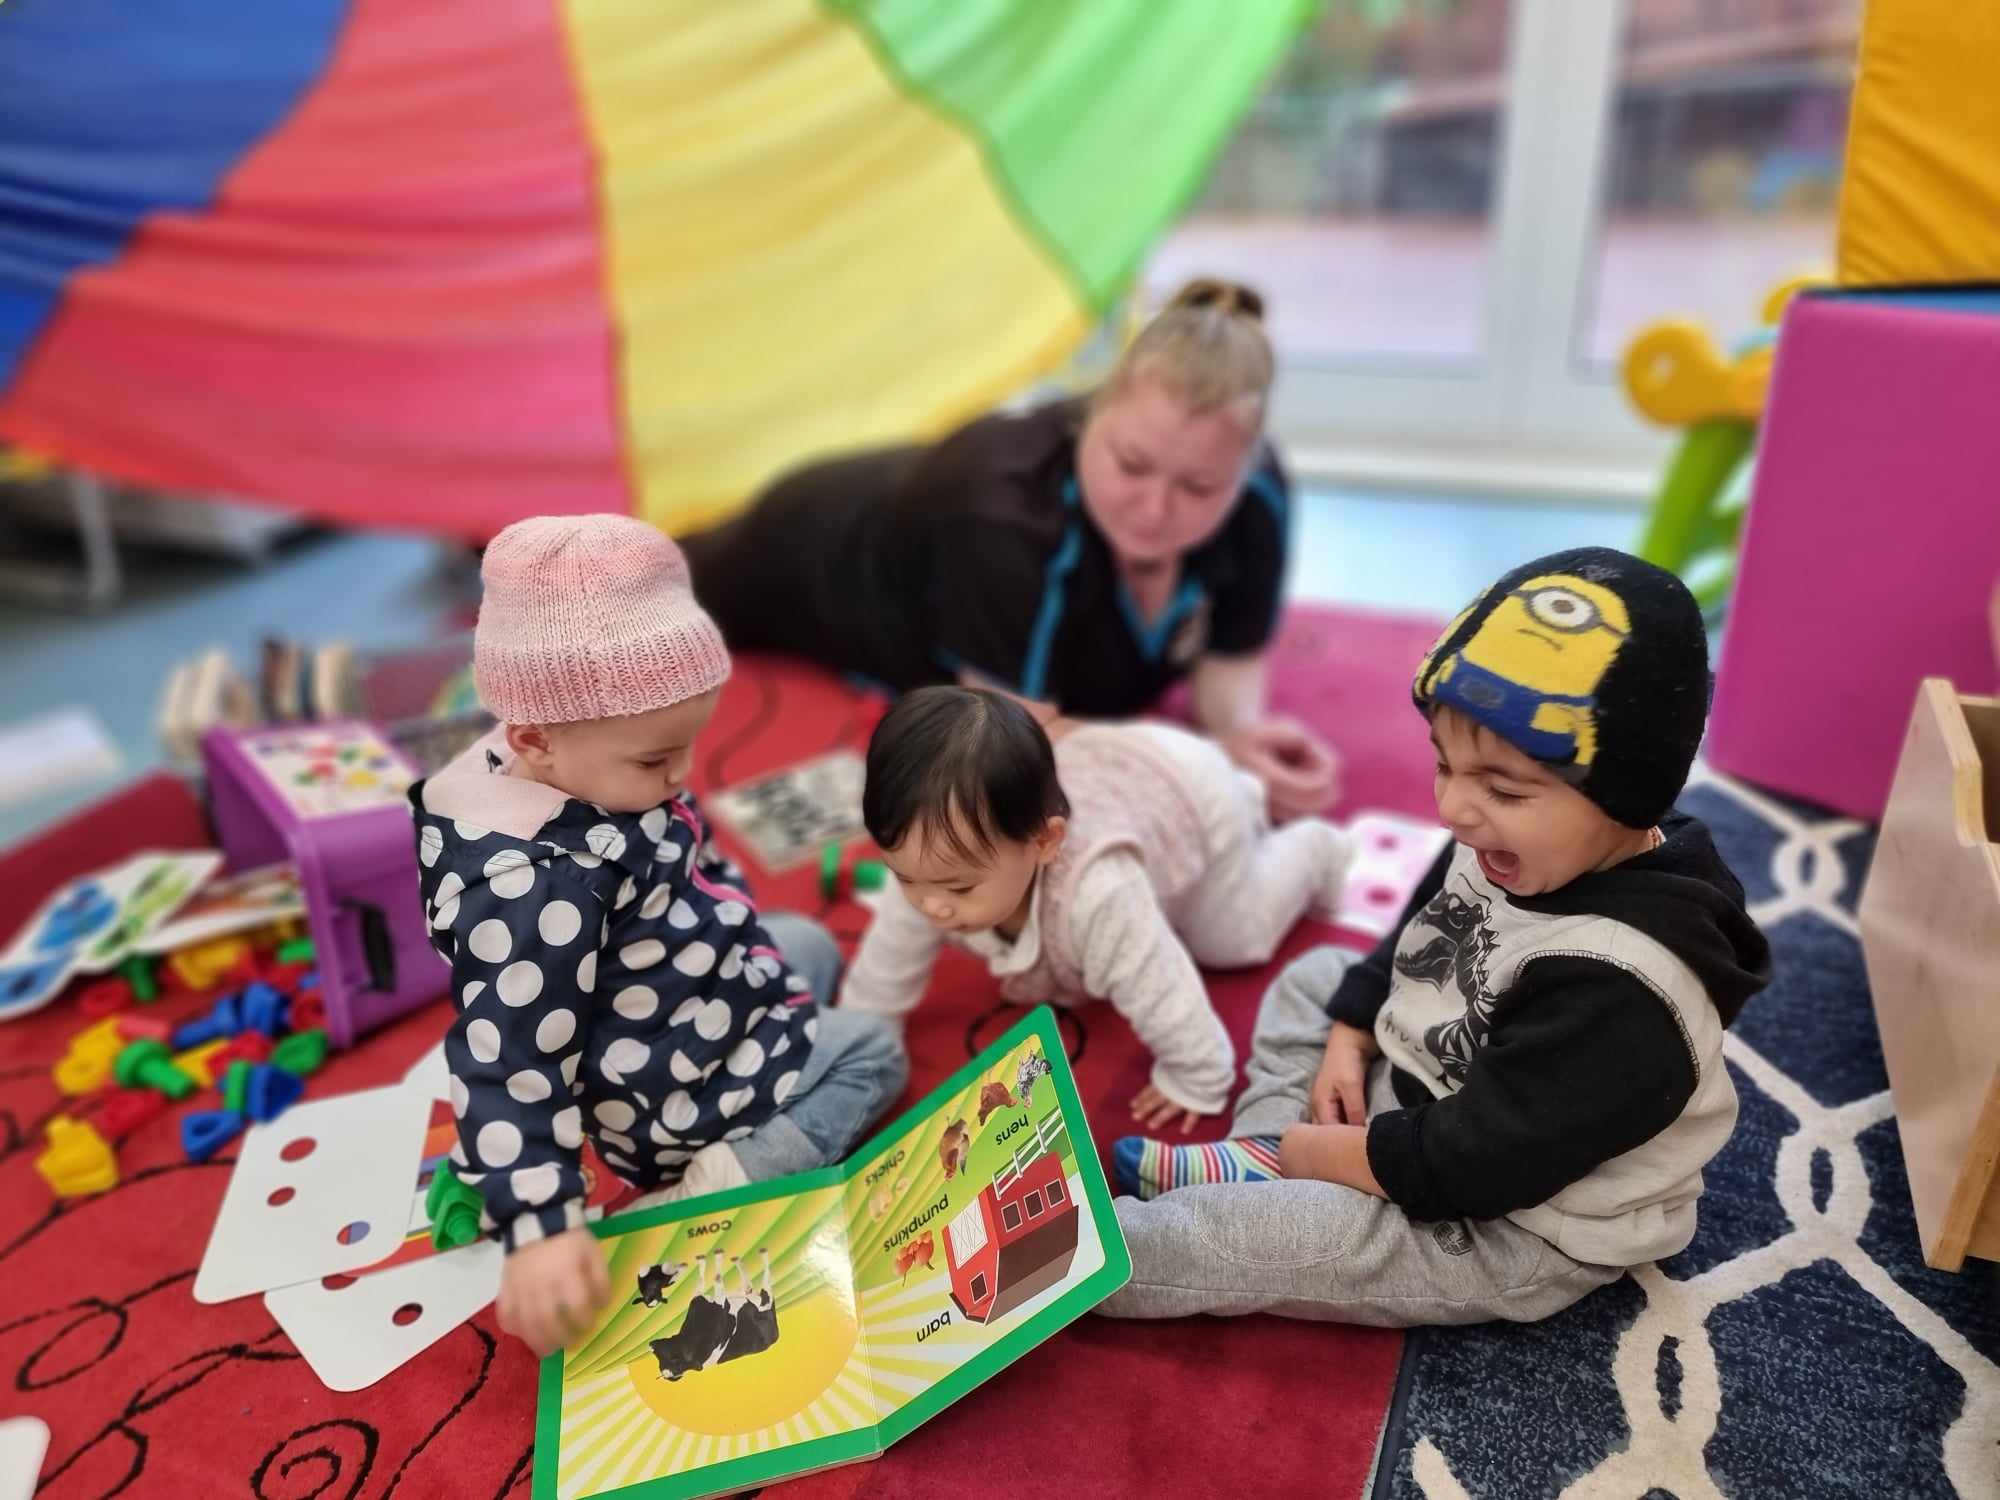 Riverhills Early Learning centre